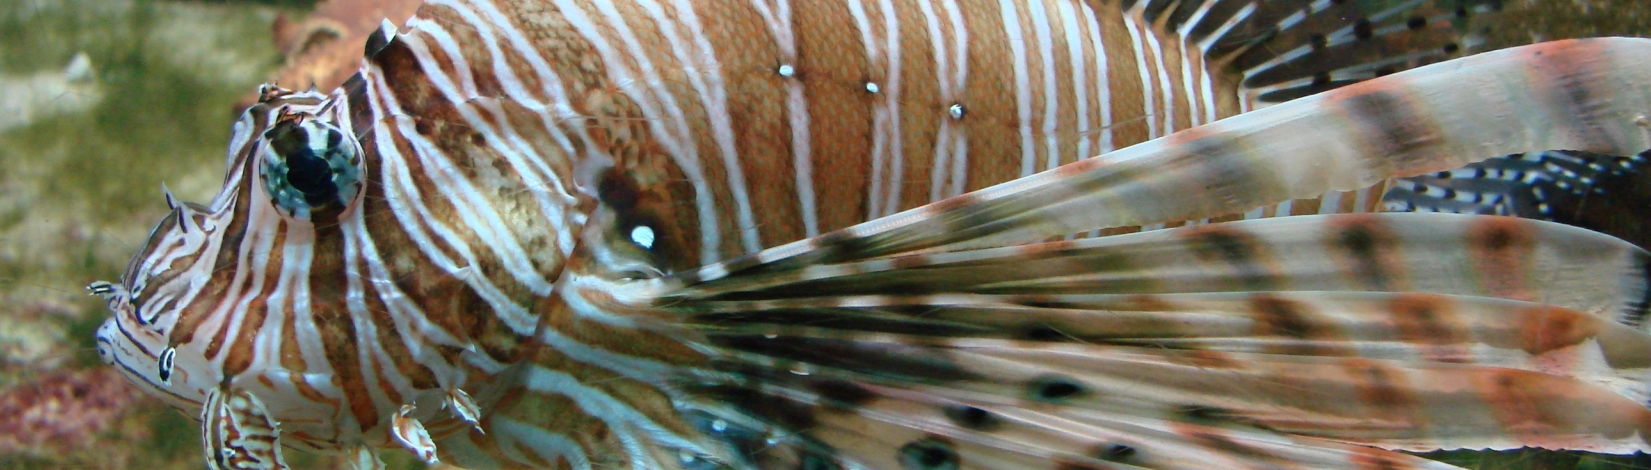 A close-up image of a fish with long fins and brown and white vertical stripes